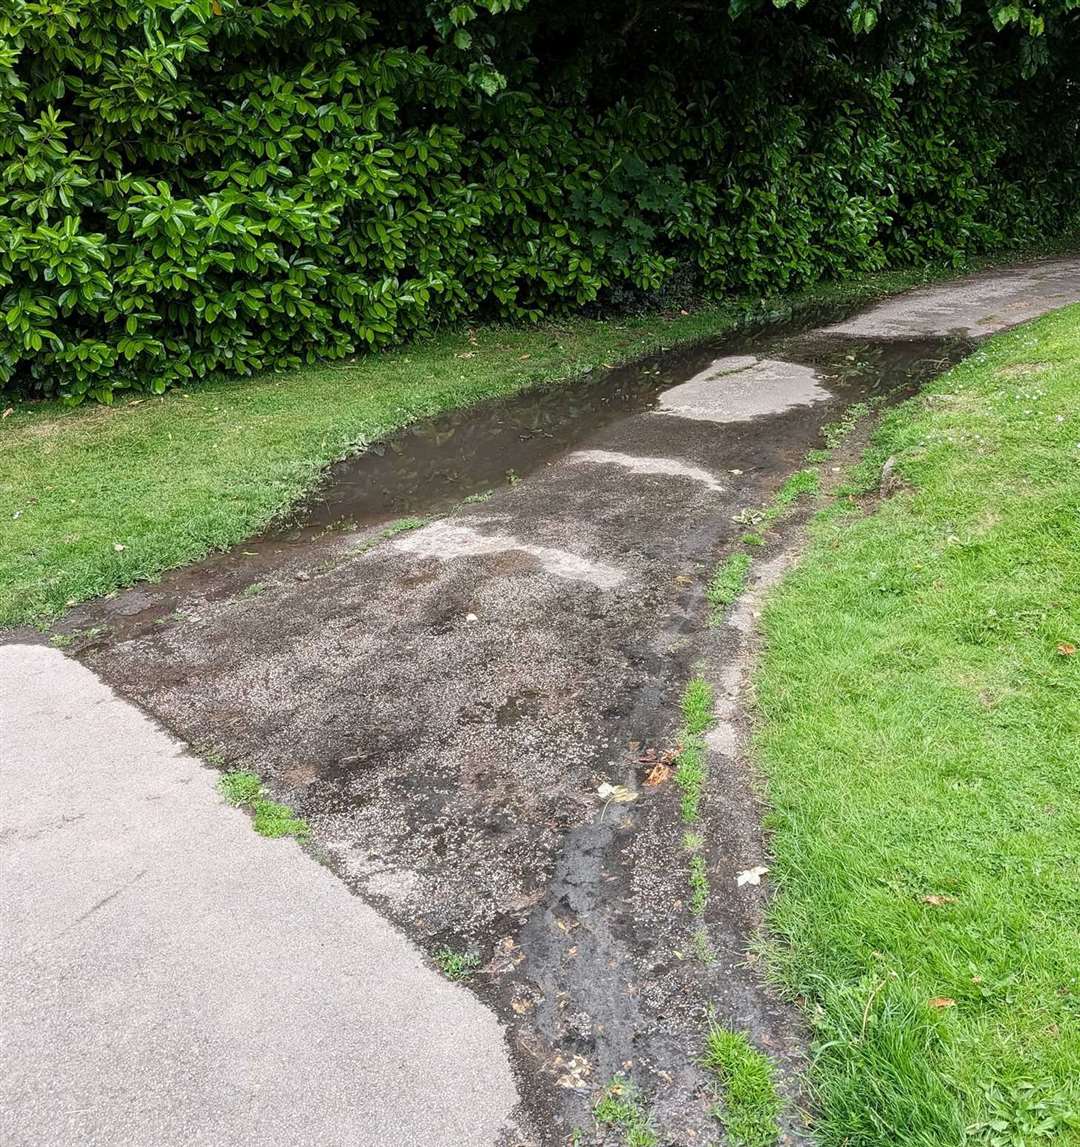 The sewage spilt onto the footpath and grass. Picture: Mark Deakin